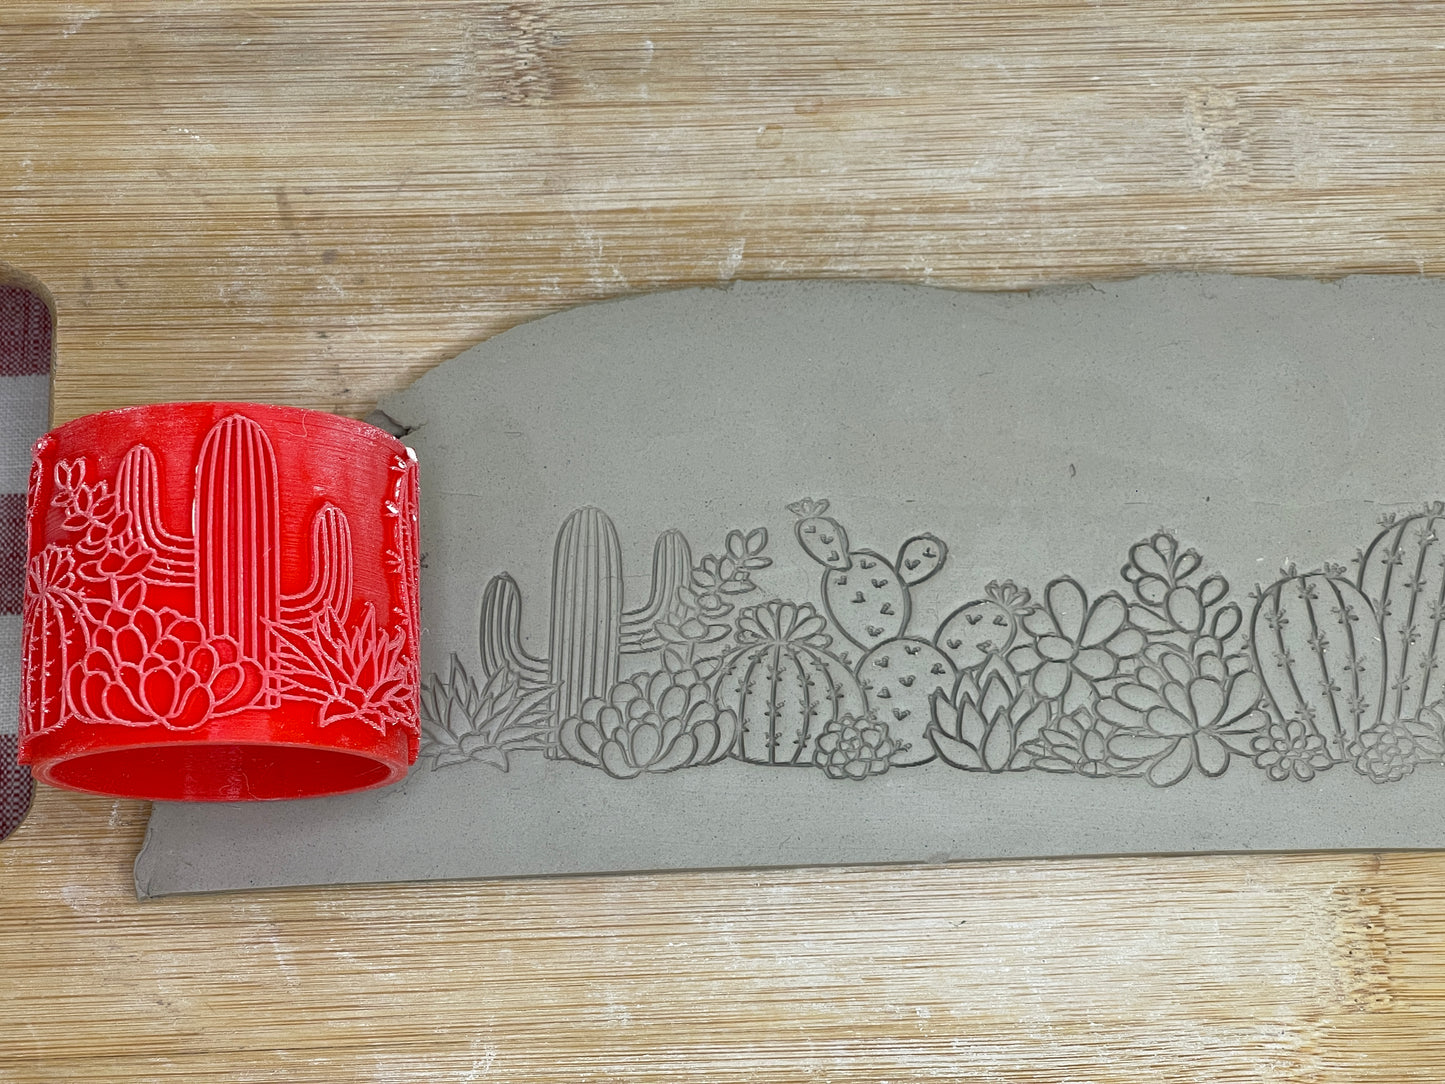 NEW size added - Cacti Pottery Roller - Border Stamp, Repeating pattern, Plastic 3d printed